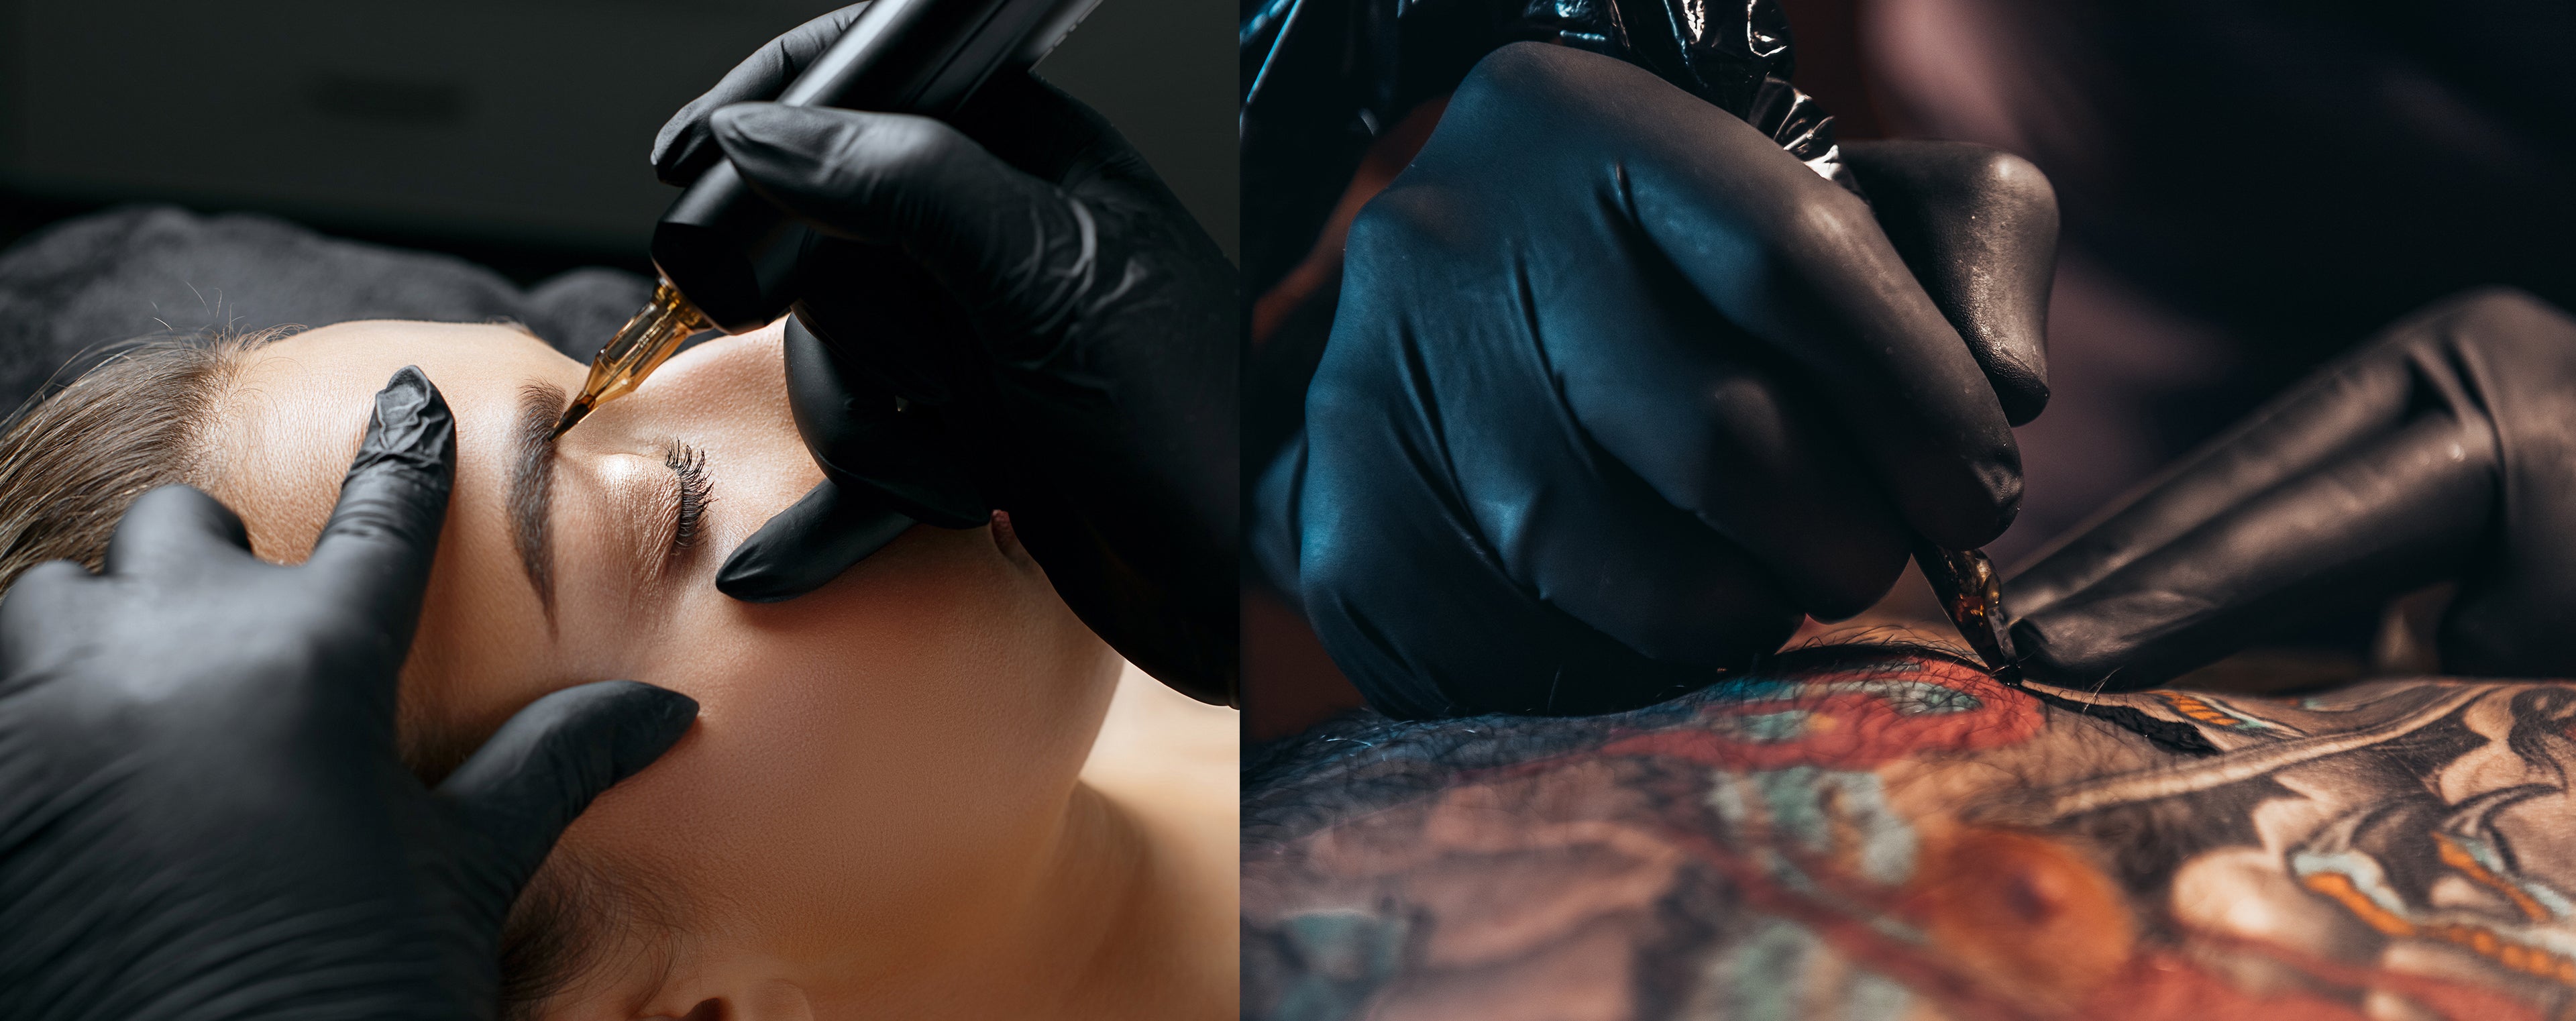 How Deep Does Tattoo Ink Go? Needle Depth, Explained.